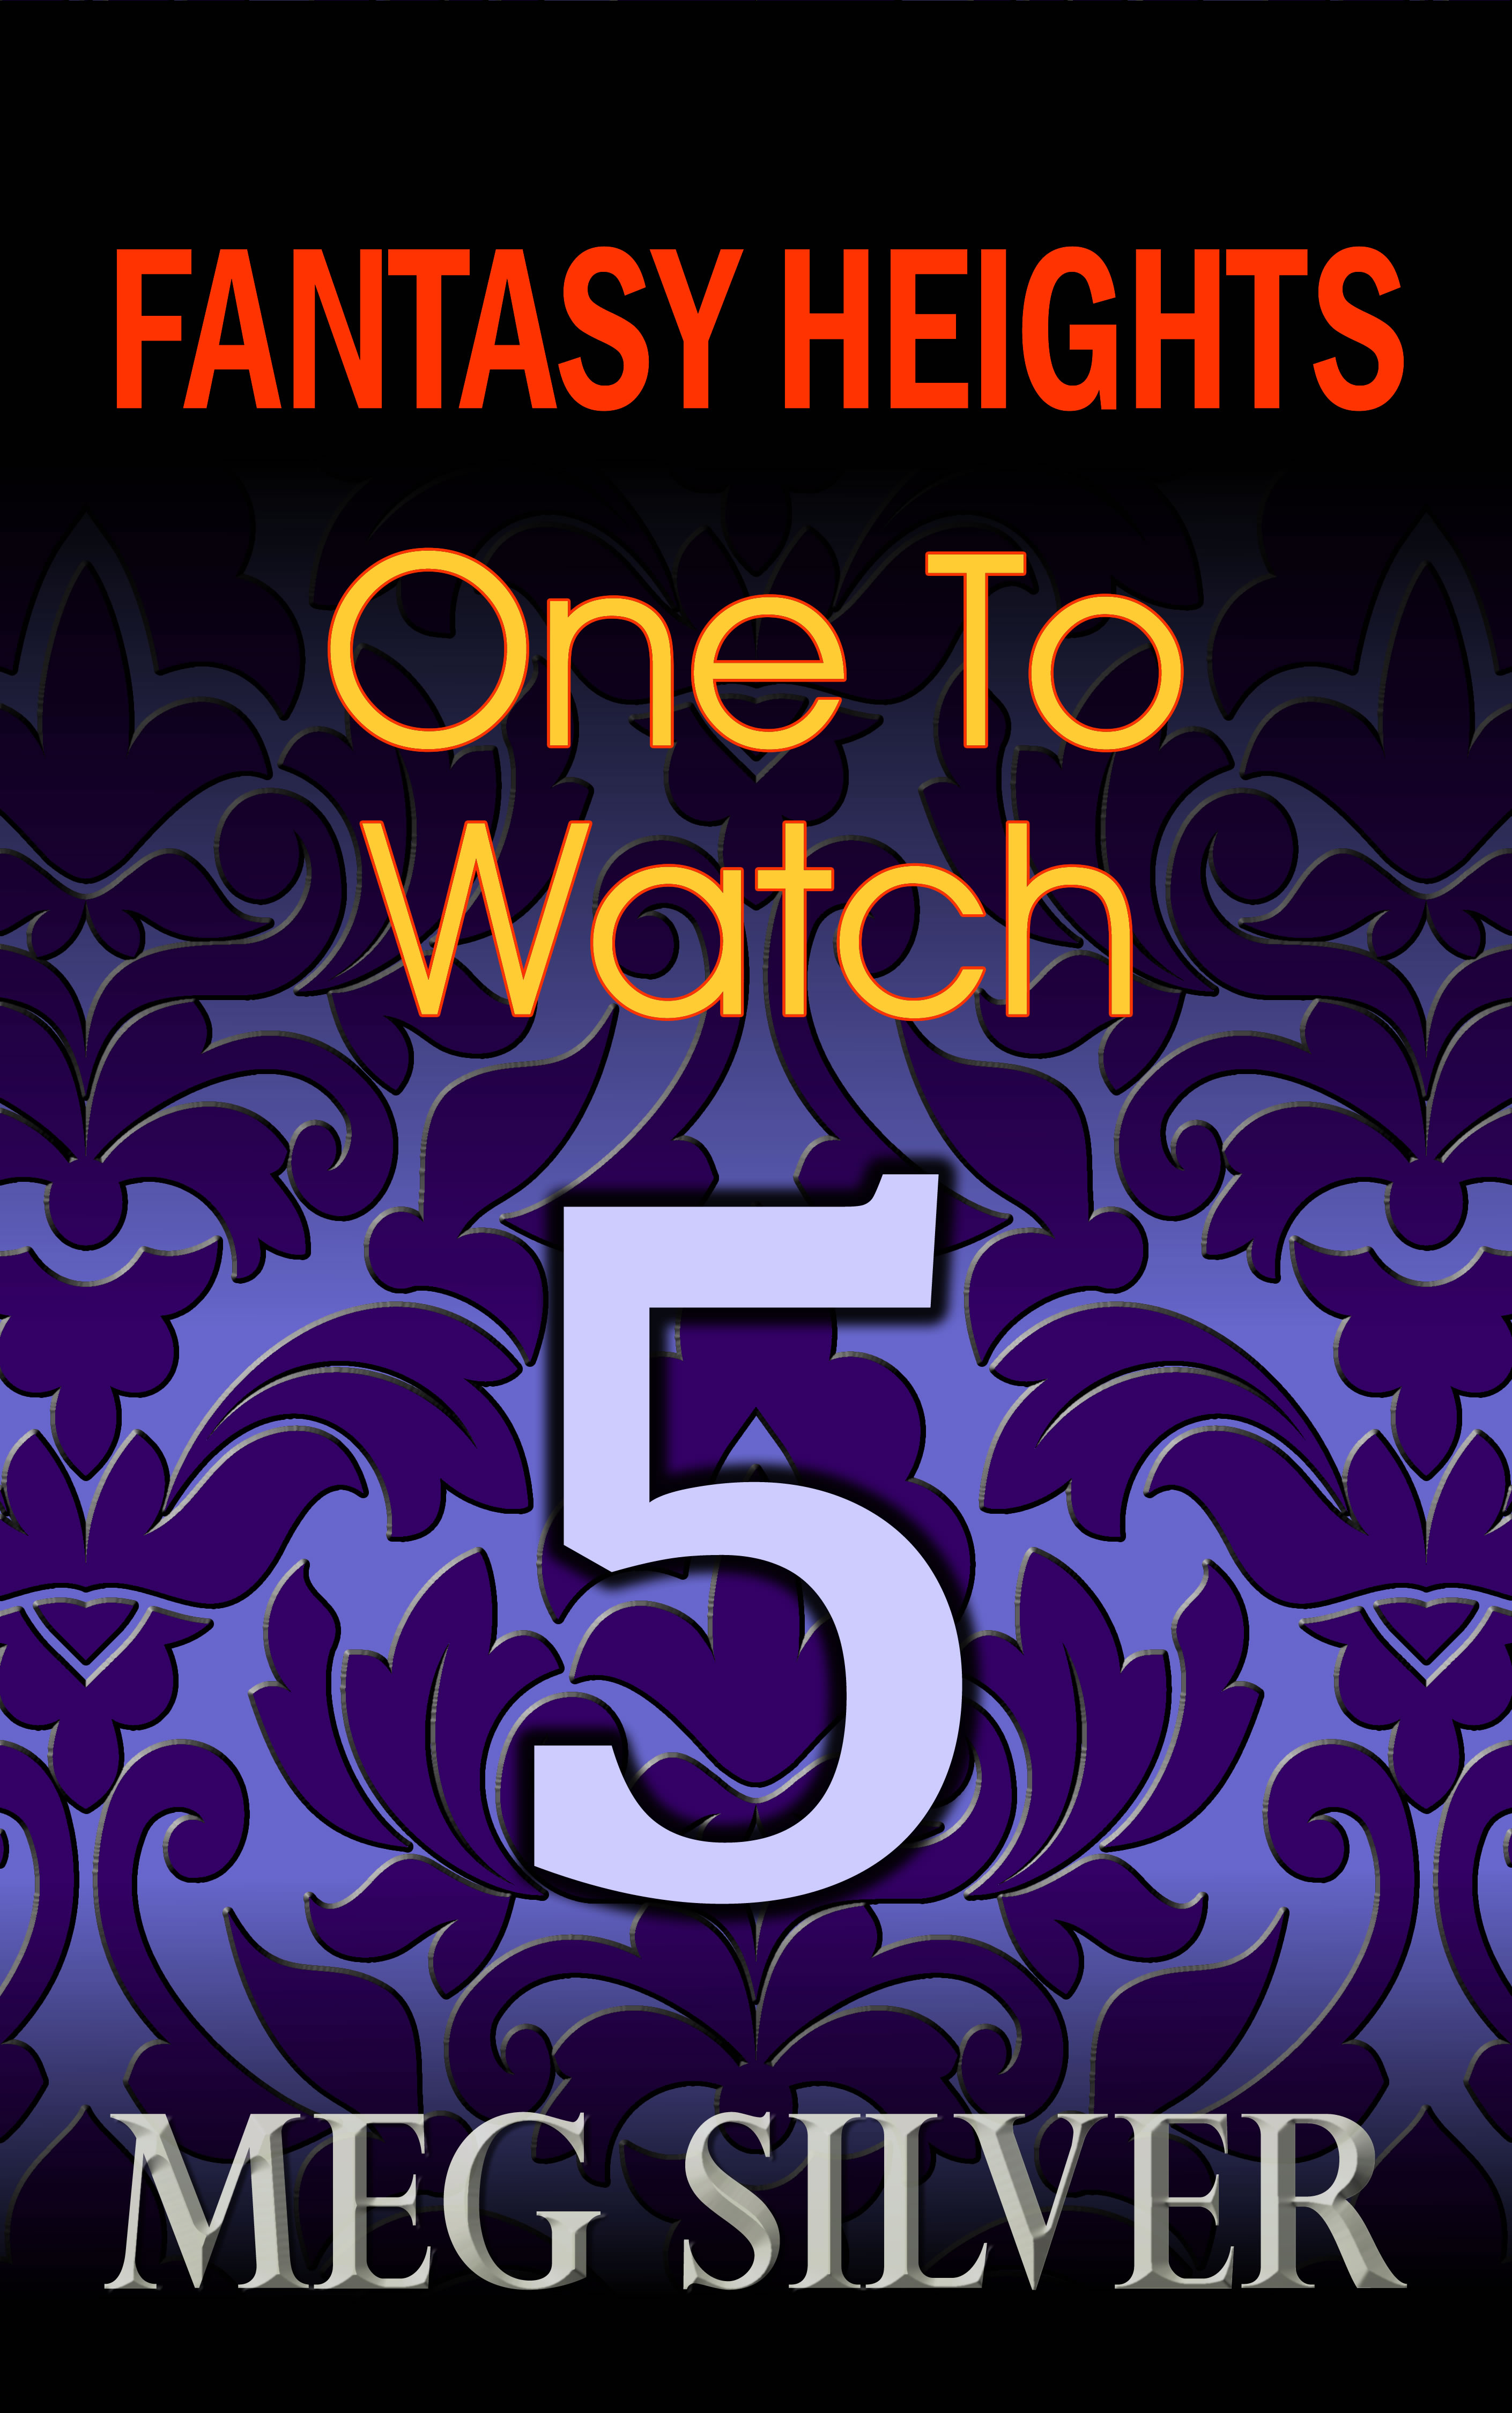 Fantasy Heights Episode 5: One To Watch